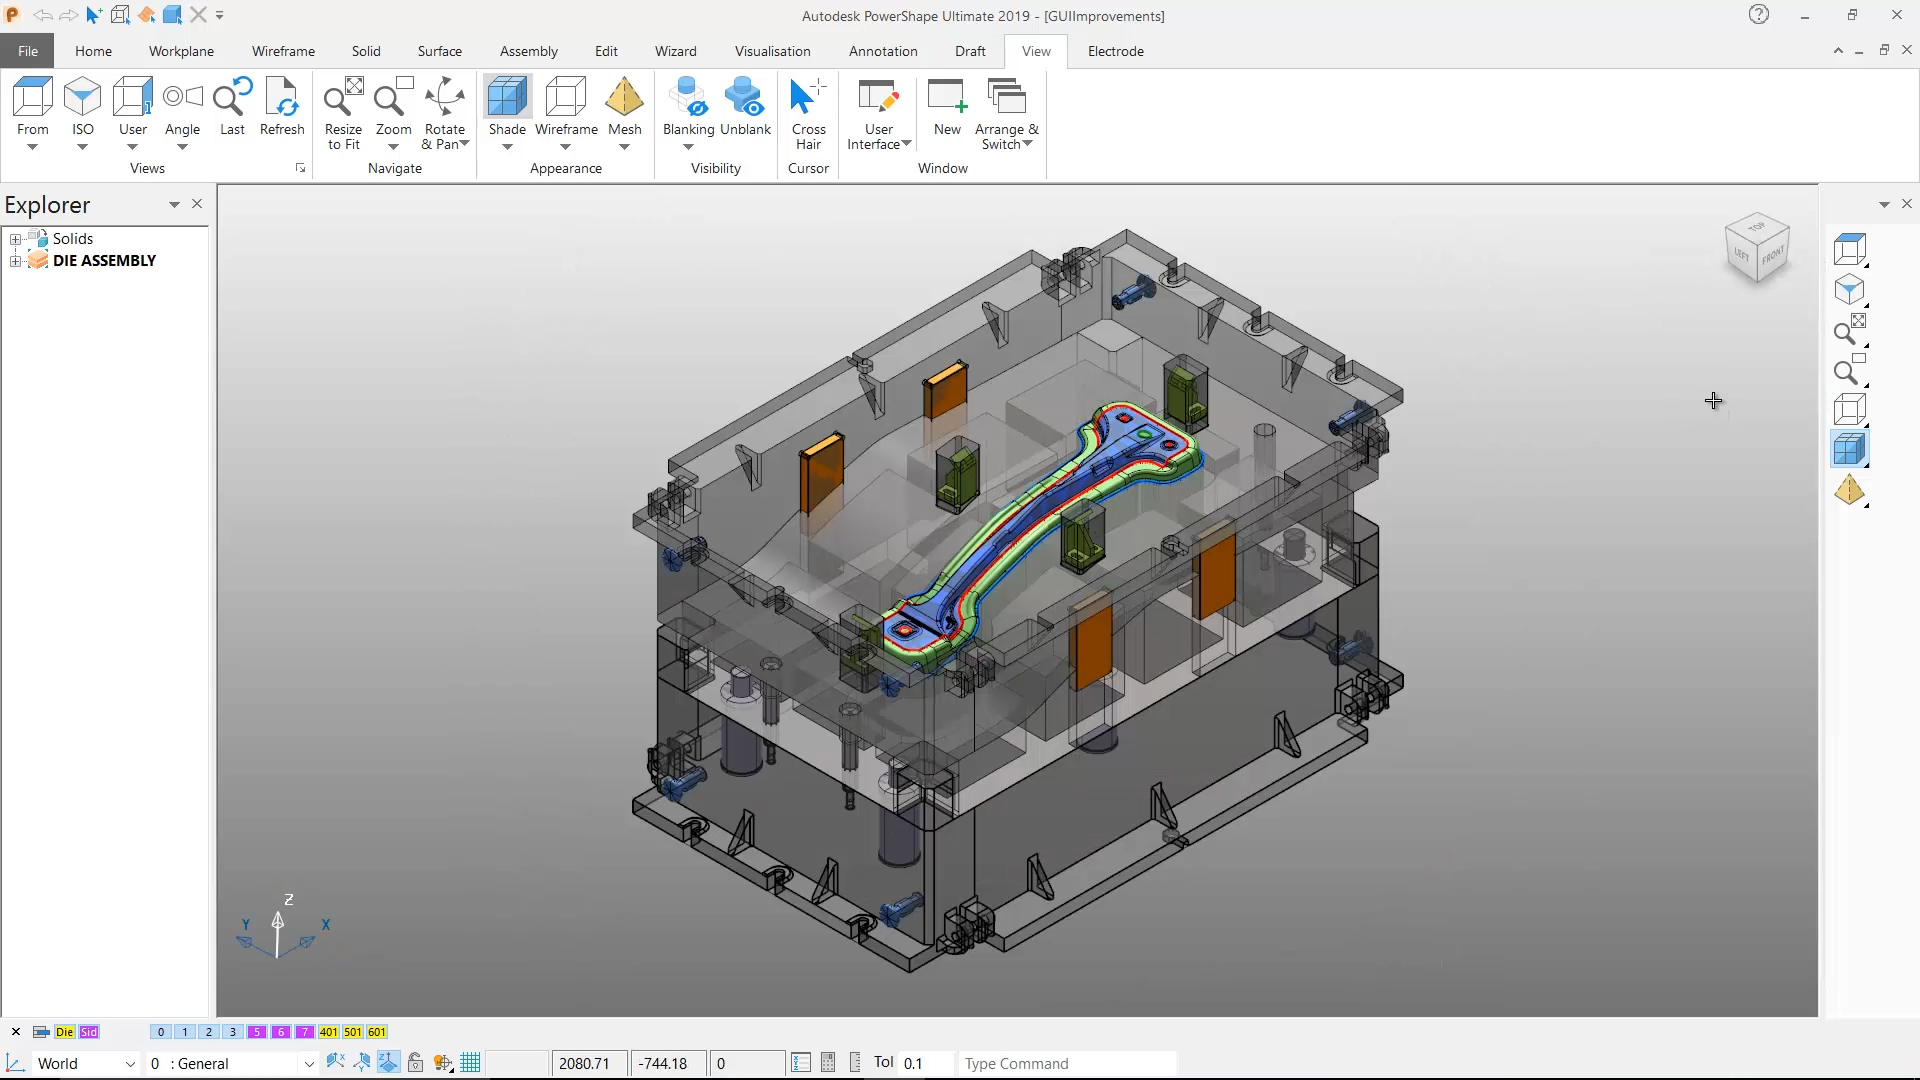 7 Game-changing features of Autodesk PowerShape - Advanced Manufacturing